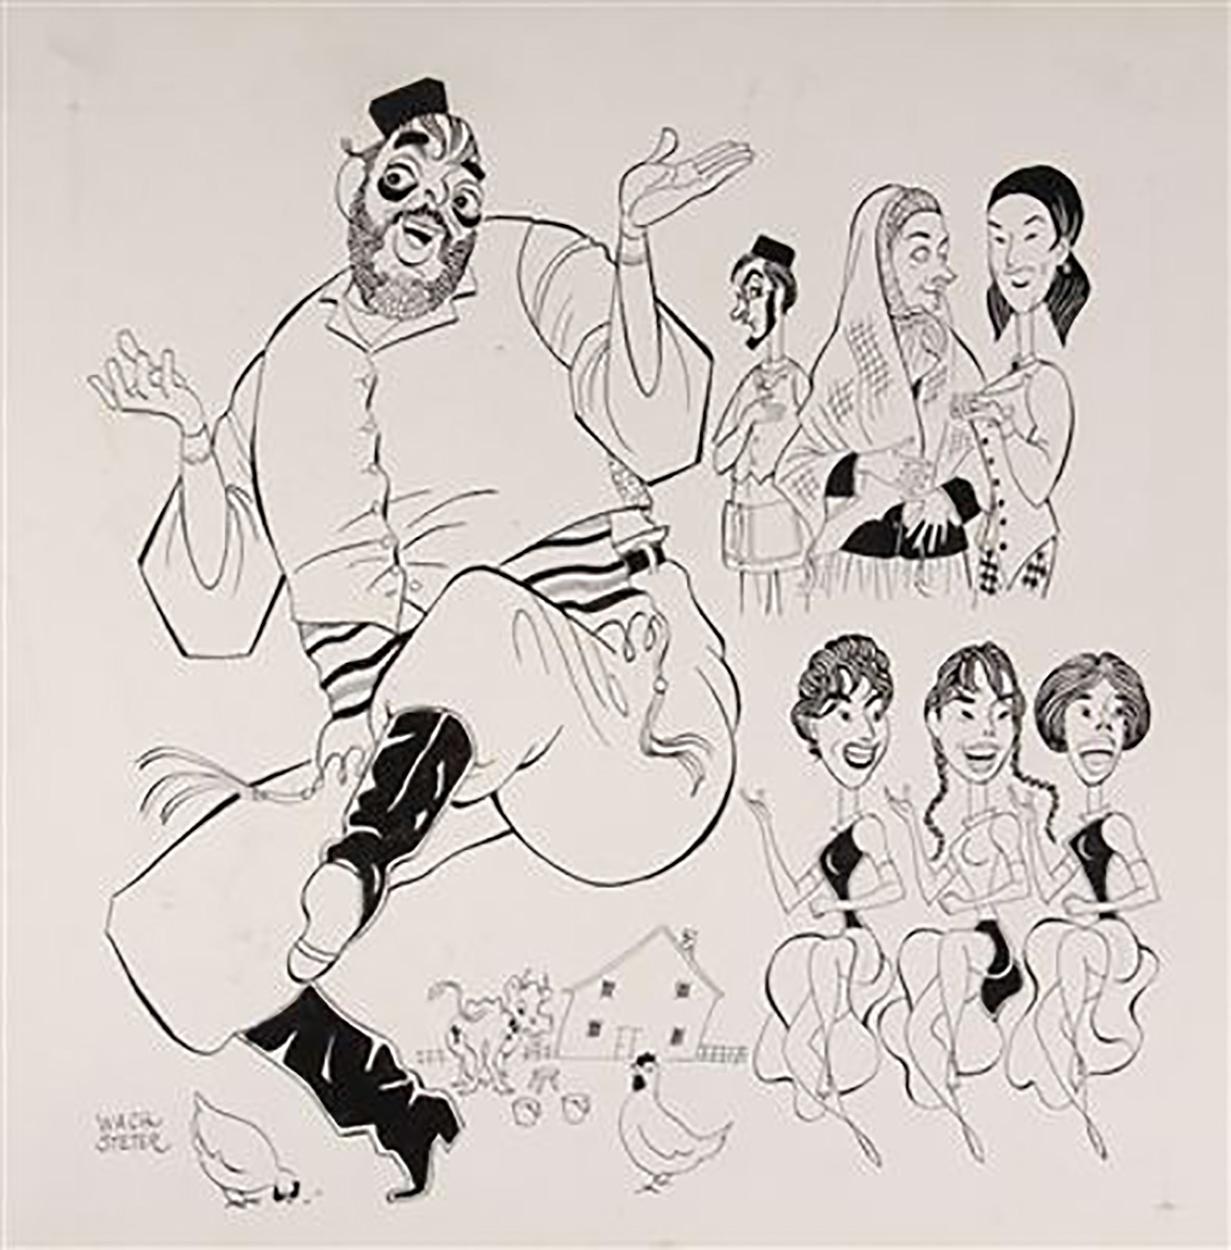 Caricature of Opening of Zero Mostel in "Fiddler on the Roof"